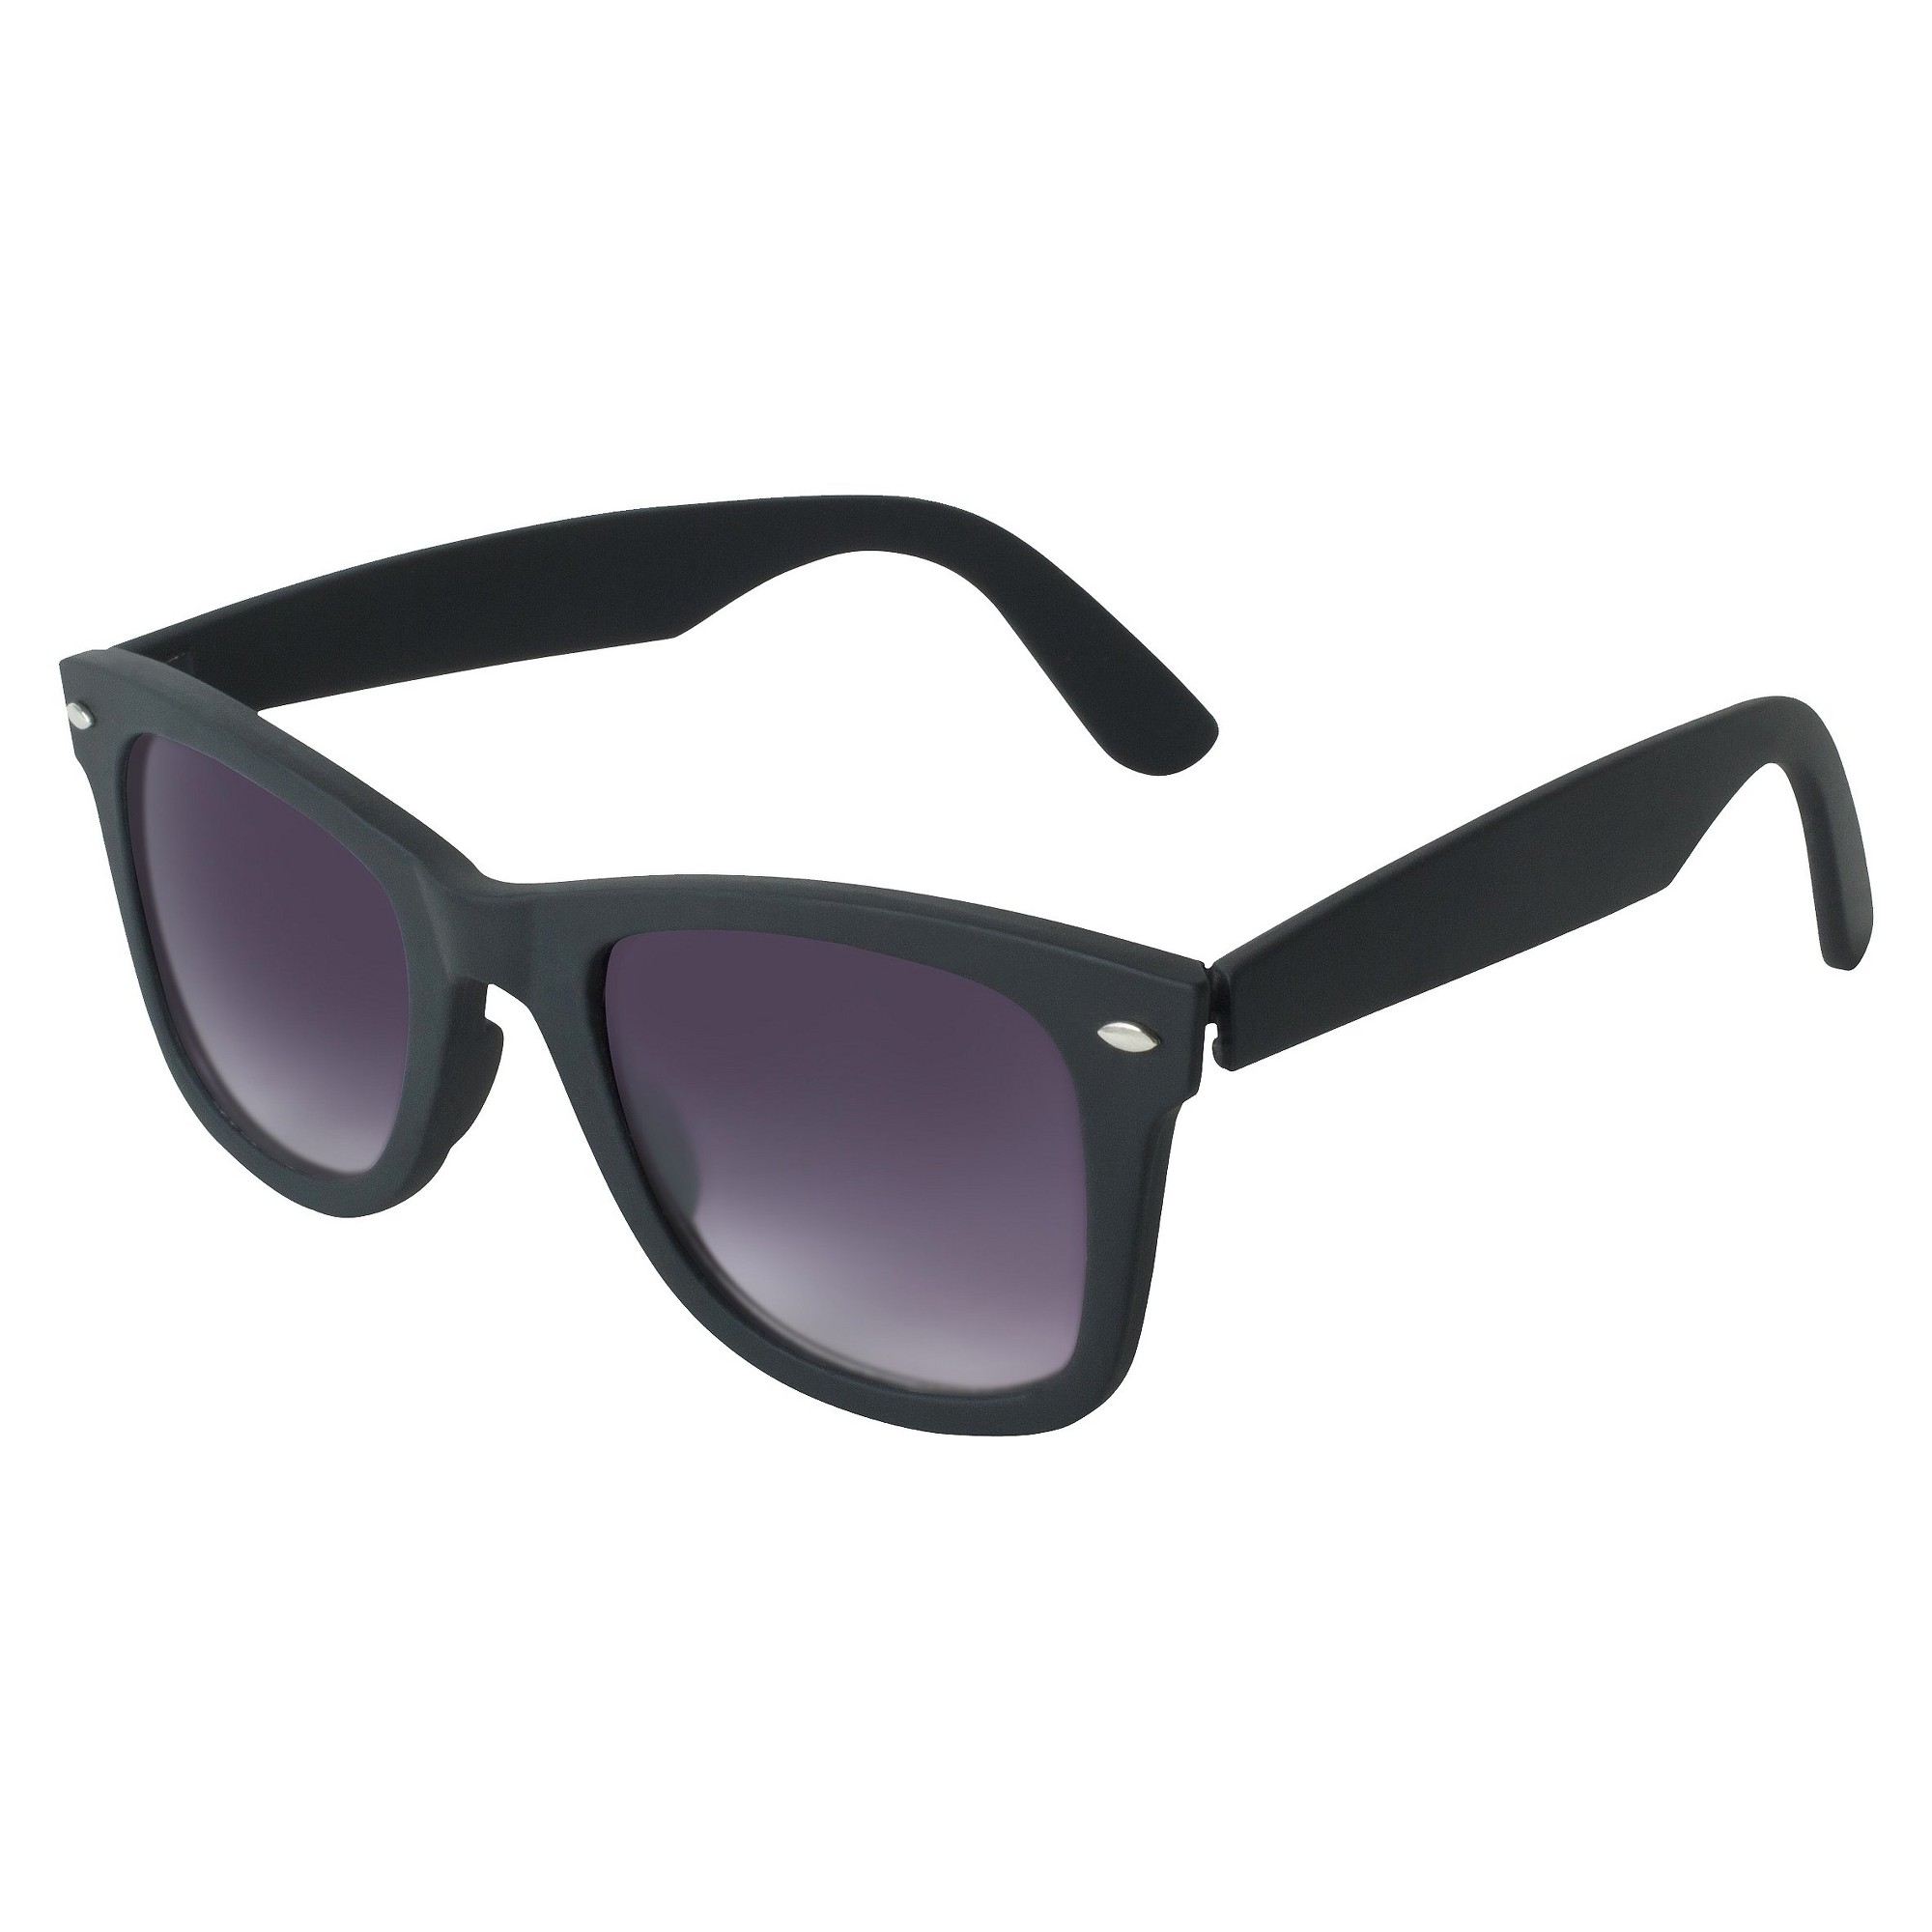 Women's Surf Sunglasses - A New Day Black, Adult Unisex, Size: Small, Black/Blue